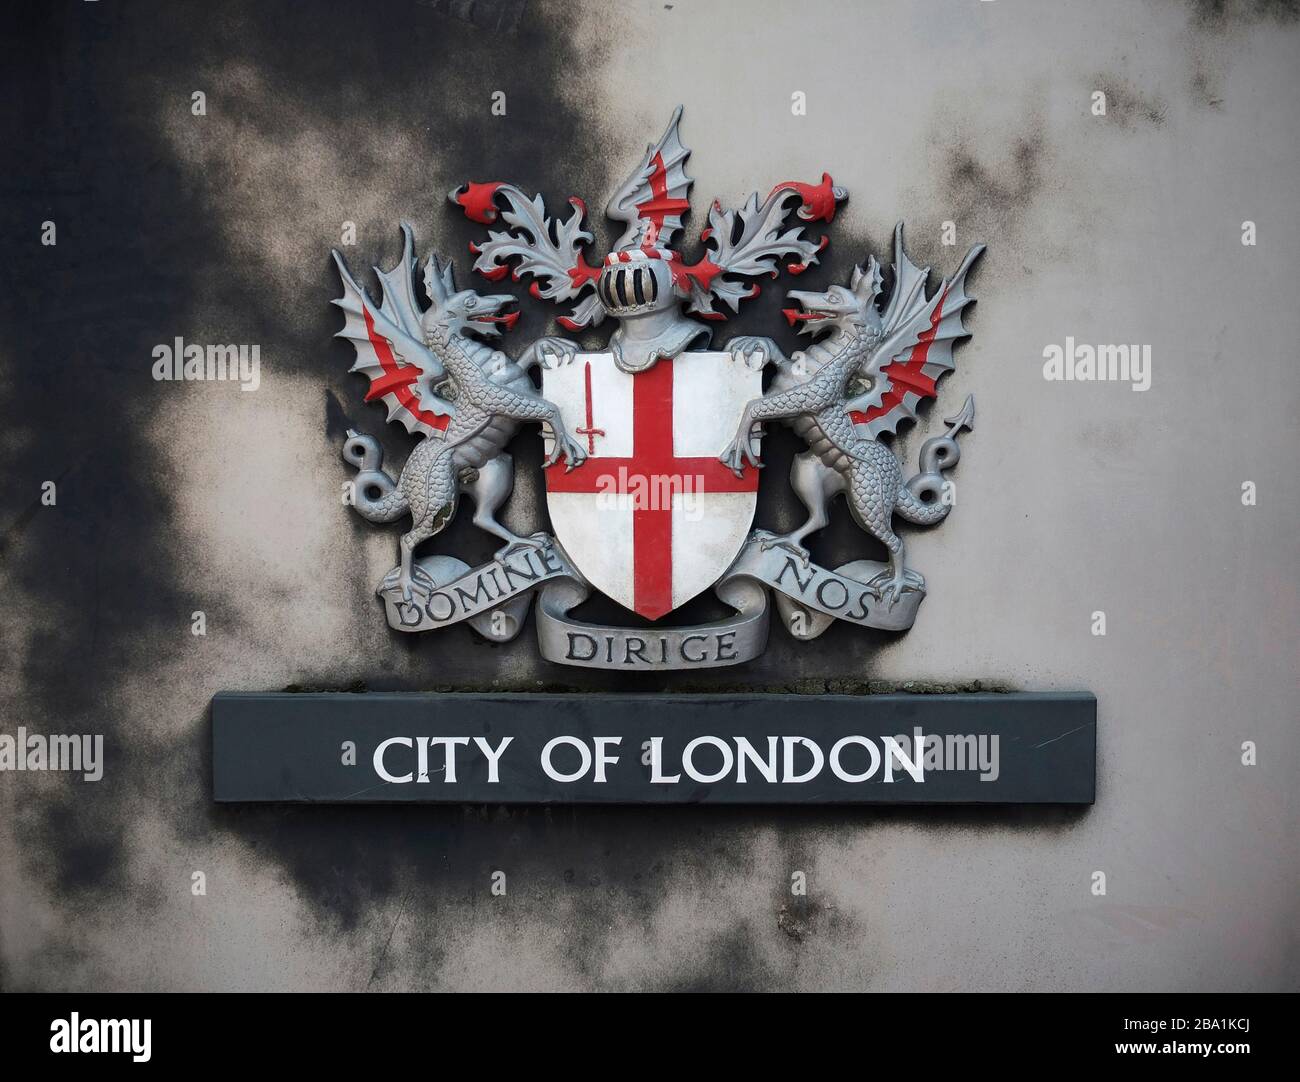 City of London Crest on Sooty Wall, Londra, Inghilterra Regno Unito Foto Stock